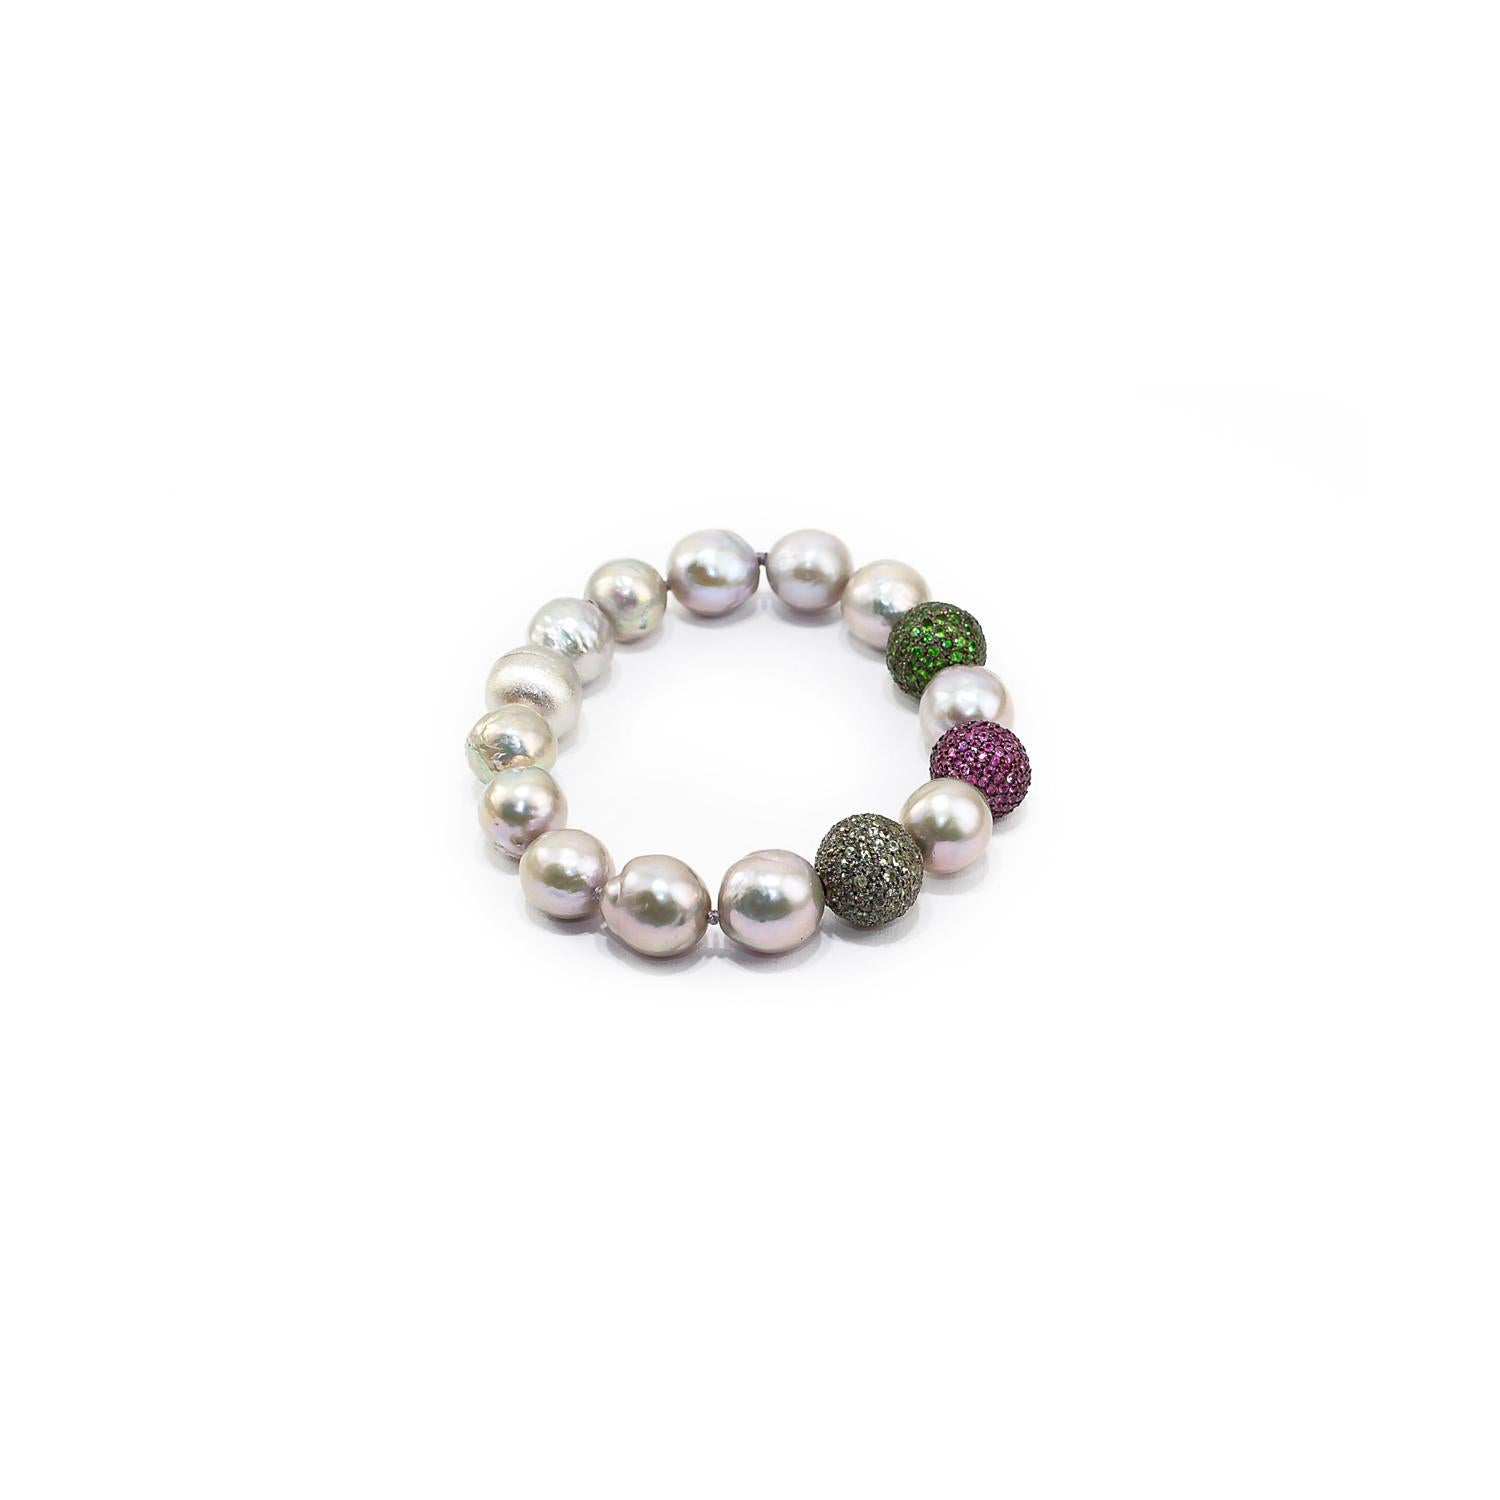 Nice bracelet made up of green sapphires, rubies and tsavorite pave on silver setting, baroque grey pearls and 925 satin silver clasp. 
Green sapphires pave ct. 1,79
Rubies pave ct. 2,26
Tsavorite pave ct. 2,07
Baroque grey pearls
925 satin silver